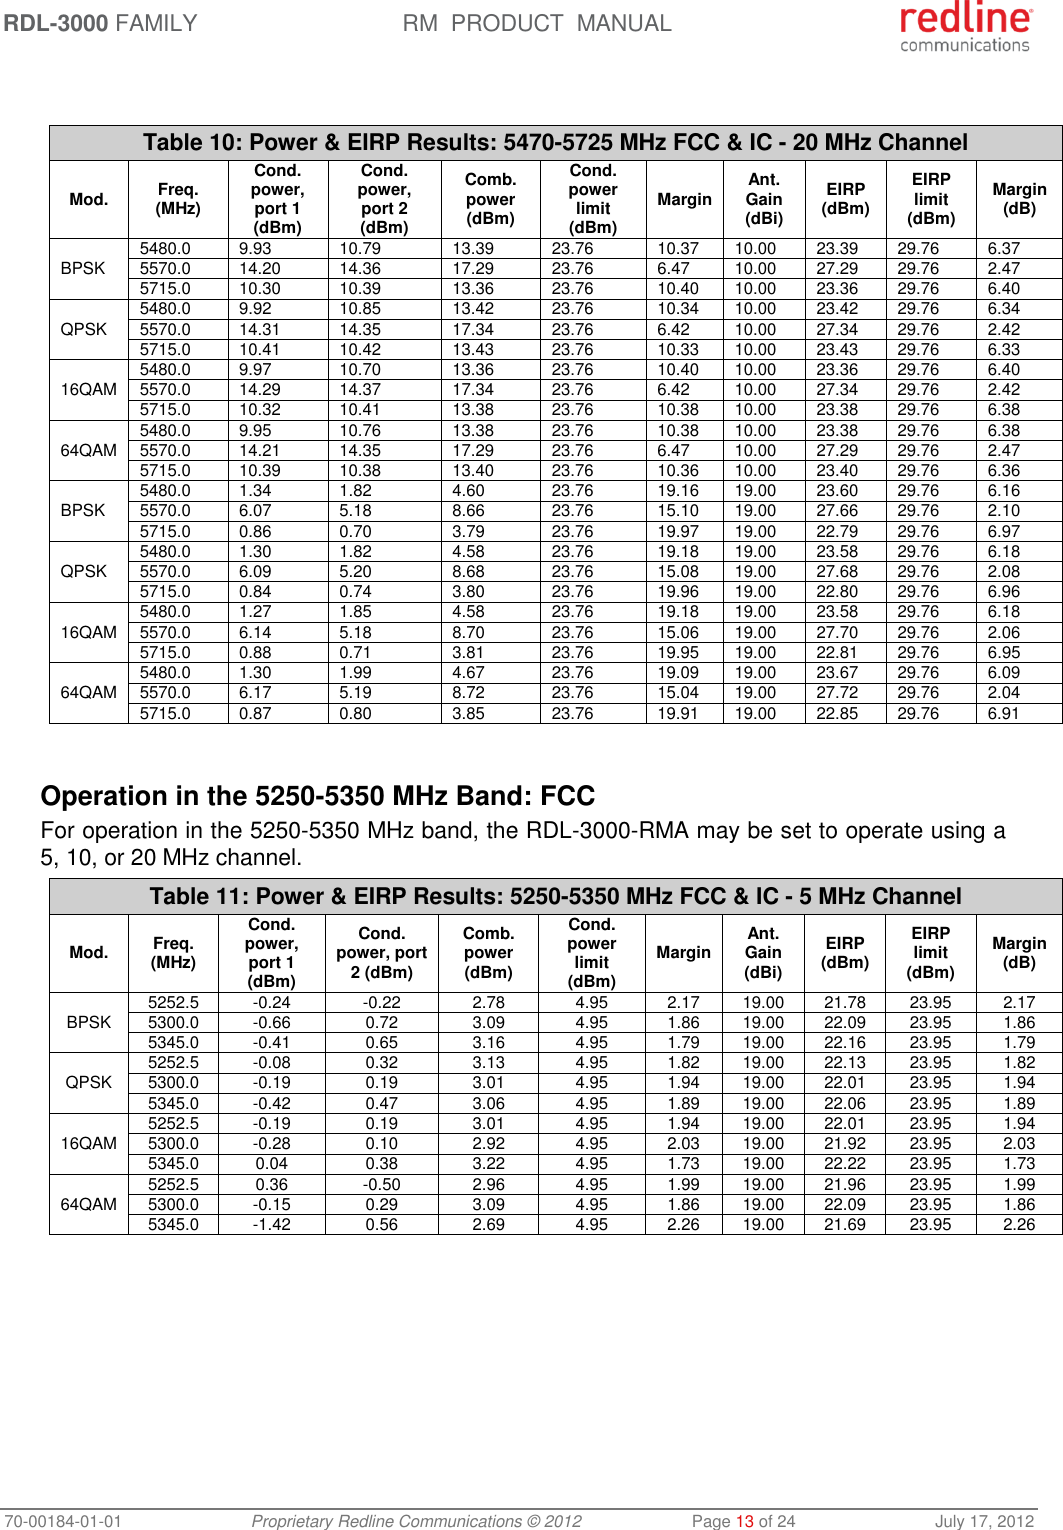 RDL-3000 FAMILY RM  PRODUCT  MANUAL 70-00184-01-01 Proprietary Redline Communications © 2012  Page 13 of 24  July 17, 2012   Table 10: Power &amp; EIRP Results: 5470-5725 MHz FCC &amp; IC - 20 MHz Channel Mod. Freq. (MHz) Cond. power, port 1 (dBm) Cond. power, port 2 (dBm) Comb. power (dBm) Cond. power limit (dBm) Margin Ant. Gain (dBi) EIRP (dBm) EIRP limit (dBm) Margin (dB) BPSK  5480.0 9.93 10.79 13.39 23.76 10.37 10.00 23.39 29.76 6.37 5570.0 14.20 14.36 17.29 23.76 6.47 10.00 27.29 29.76 2.47 5715.0 10.30 10.39 13.36 23.76 10.40 10.00 23.36 29.76 6.40 QPSK 5480.0 9.92 10.85 13.42 23.76 10.34 10.00 23.42 29.76 6.34 5570.0 14.31 14.35 17.34 23.76 6.42 10.00 27.34 29.76 2.42 5715.0 10.41 10.42 13.43 23.76 10.33 10.00 23.43 29.76 6.33 16QAM 5480.0 9.97 10.70 13.36 23.76 10.40 10.00 23.36 29.76 6.40 5570.0 14.29 14.37 17.34 23.76 6.42 10.00 27.34 29.76 2.42 5715.0 10.32 10.41 13.38 23.76 10.38 10.00 23.38 29.76 6.38 64QAM 5480.0 9.95 10.76 13.38 23.76 10.38 10.00 23.38 29.76 6.38 5570.0 14.21 14.35 17.29 23.76 6.47 10.00 27.29 29.76 2.47 5715.0 10.39 10.38 13.40 23.76 10.36 10.00 23.40 29.76 6.36 BPSK  5480.0 1.34 1.82 4.60 23.76 19.16 19.00 23.60 29.76 6.16 5570.0 6.07 5.18 8.66 23.76 15.10 19.00 27.66 29.76 2.10 5715.0 0.86 0.70 3.79 23.76 19.97 19.00 22.79 29.76 6.97 QPSK 5480.0 1.30 1.82 4.58 23.76 19.18 19.00 23.58 29.76 6.18 5570.0 6.09 5.20 8.68 23.76 15.08 19.00 27.68 29.76 2.08 5715.0 0.84 0.74 3.80 23.76 19.96 19.00 22.80 29.76 6.96 16QAM 5480.0 1.27 1.85 4.58 23.76 19.18 19.00 23.58 29.76 6.18 5570.0 6.14 5.18 8.70 23.76 15.06 19.00 27.70 29.76 2.06 5715.0 0.88 0.71 3.81 23.76 19.95 19.00 22.81 29.76 6.95 64QAM 5480.0 1.30 1.99 4.67 23.76 19.09 19.00 23.67 29.76 6.09 5570.0 6.17 5.19 8.72 23.76 15.04 19.00 27.72 29.76 2.04 5715.0 0.87 0.80 3.85 23.76 19.91 19.00 22.85 29.76 6.91      Operation in the 5250-5350 MHz Band: FCC For operation in the 5250-5350 MHz band, the RDL-3000-RMA may be set to operate using a 5, 10, or 20 MHz channel. Table 11: Power &amp; EIRP Results: 5250-5350 MHz FCC &amp; IC - 5 MHz Channel Mod. Freq. (MHz) Cond. power, port 1 (dBm) Cond. power, port 2 (dBm) Comb. power (dBm) Cond. power limit (dBm) Margin Ant. Gain (dBi) EIRP (dBm) EIRP limit (dBm) Margin (dB) BPSK 5252.5 -0.24 -0.22 2.78 4.95 2.17 19.00 21.78 23.95 2.17 5300.0 -0.66 0.72 3.09 4.95 1.86 19.00 22.09 23.95 1.86 5345.0 -0.41 0.65 3.16 4.95 1.79 19.00 22.16 23.95 1.79 QPSK 5252.5 -0.08 0.32 3.13 4.95 1.82 19.00 22.13 23.95 1.82 5300.0 -0.19 0.19 3.01 4.95 1.94 19.00 22.01 23.95 1.94 5345.0 -0.42 0.47 3.06 4.95 1.89 19.00 22.06 23.95 1.89 16QAM 5252.5 -0.19 0.19 3.01 4.95 1.94 19.00 22.01 23.95 1.94 5300.0 -0.28 0.10 2.92 4.95 2.03 19.00 21.92 23.95 2.03 5345.0 0.04 0.38 3.22 4.95 1.73 19.00 22.22 23.95 1.73 64QAM 5252.5 0.36 -0.50 2.96 4.95 1.99 19.00 21.96 23.95 1.99 5300.0 -0.15 0.29 3.09 4.95 1.86 19.00 22.09 23.95 1.86 5345.0 -1.42 0.56 2.69 4.95 2.26 19.00 21.69 23.95 2.26  